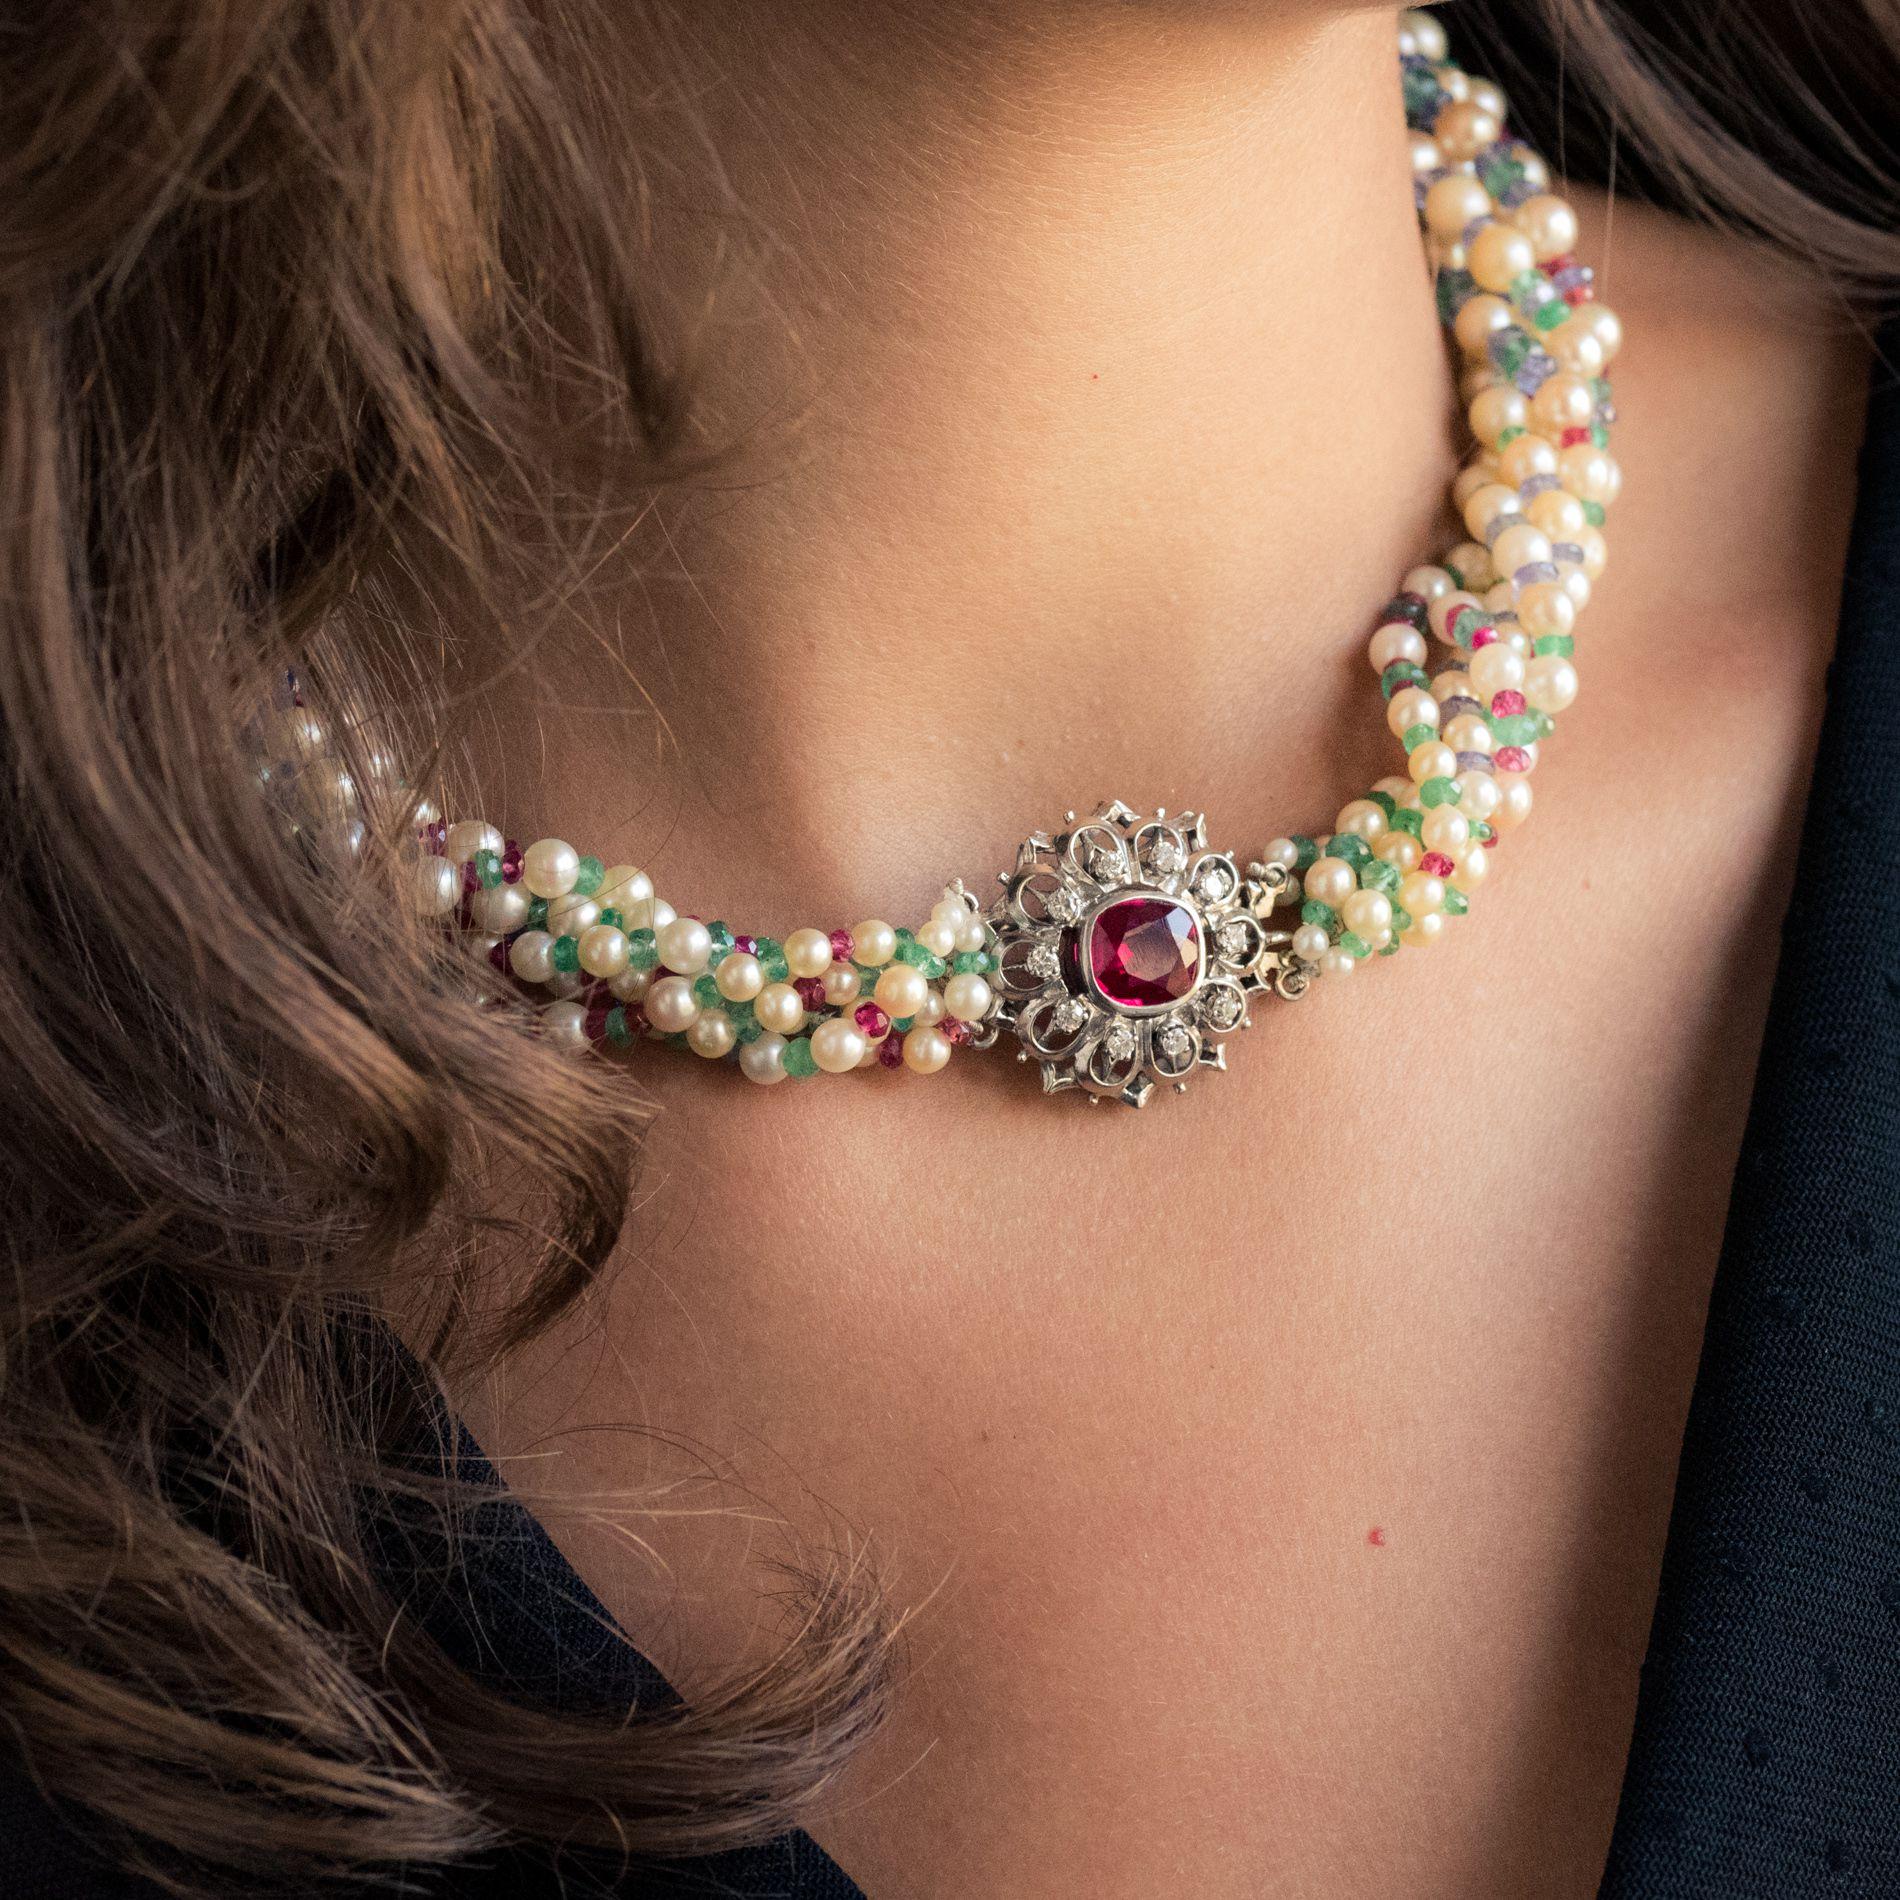 Baume creation - Unique piece.
Necklace of 6 rows of cultured white oriental pearls, diameters; 6.5/7 to 3/3.5, alternated with round and facetted oval emerald beads, pink facetted spinel beads, and facetted rubies and sapphires. The clasp is a 18